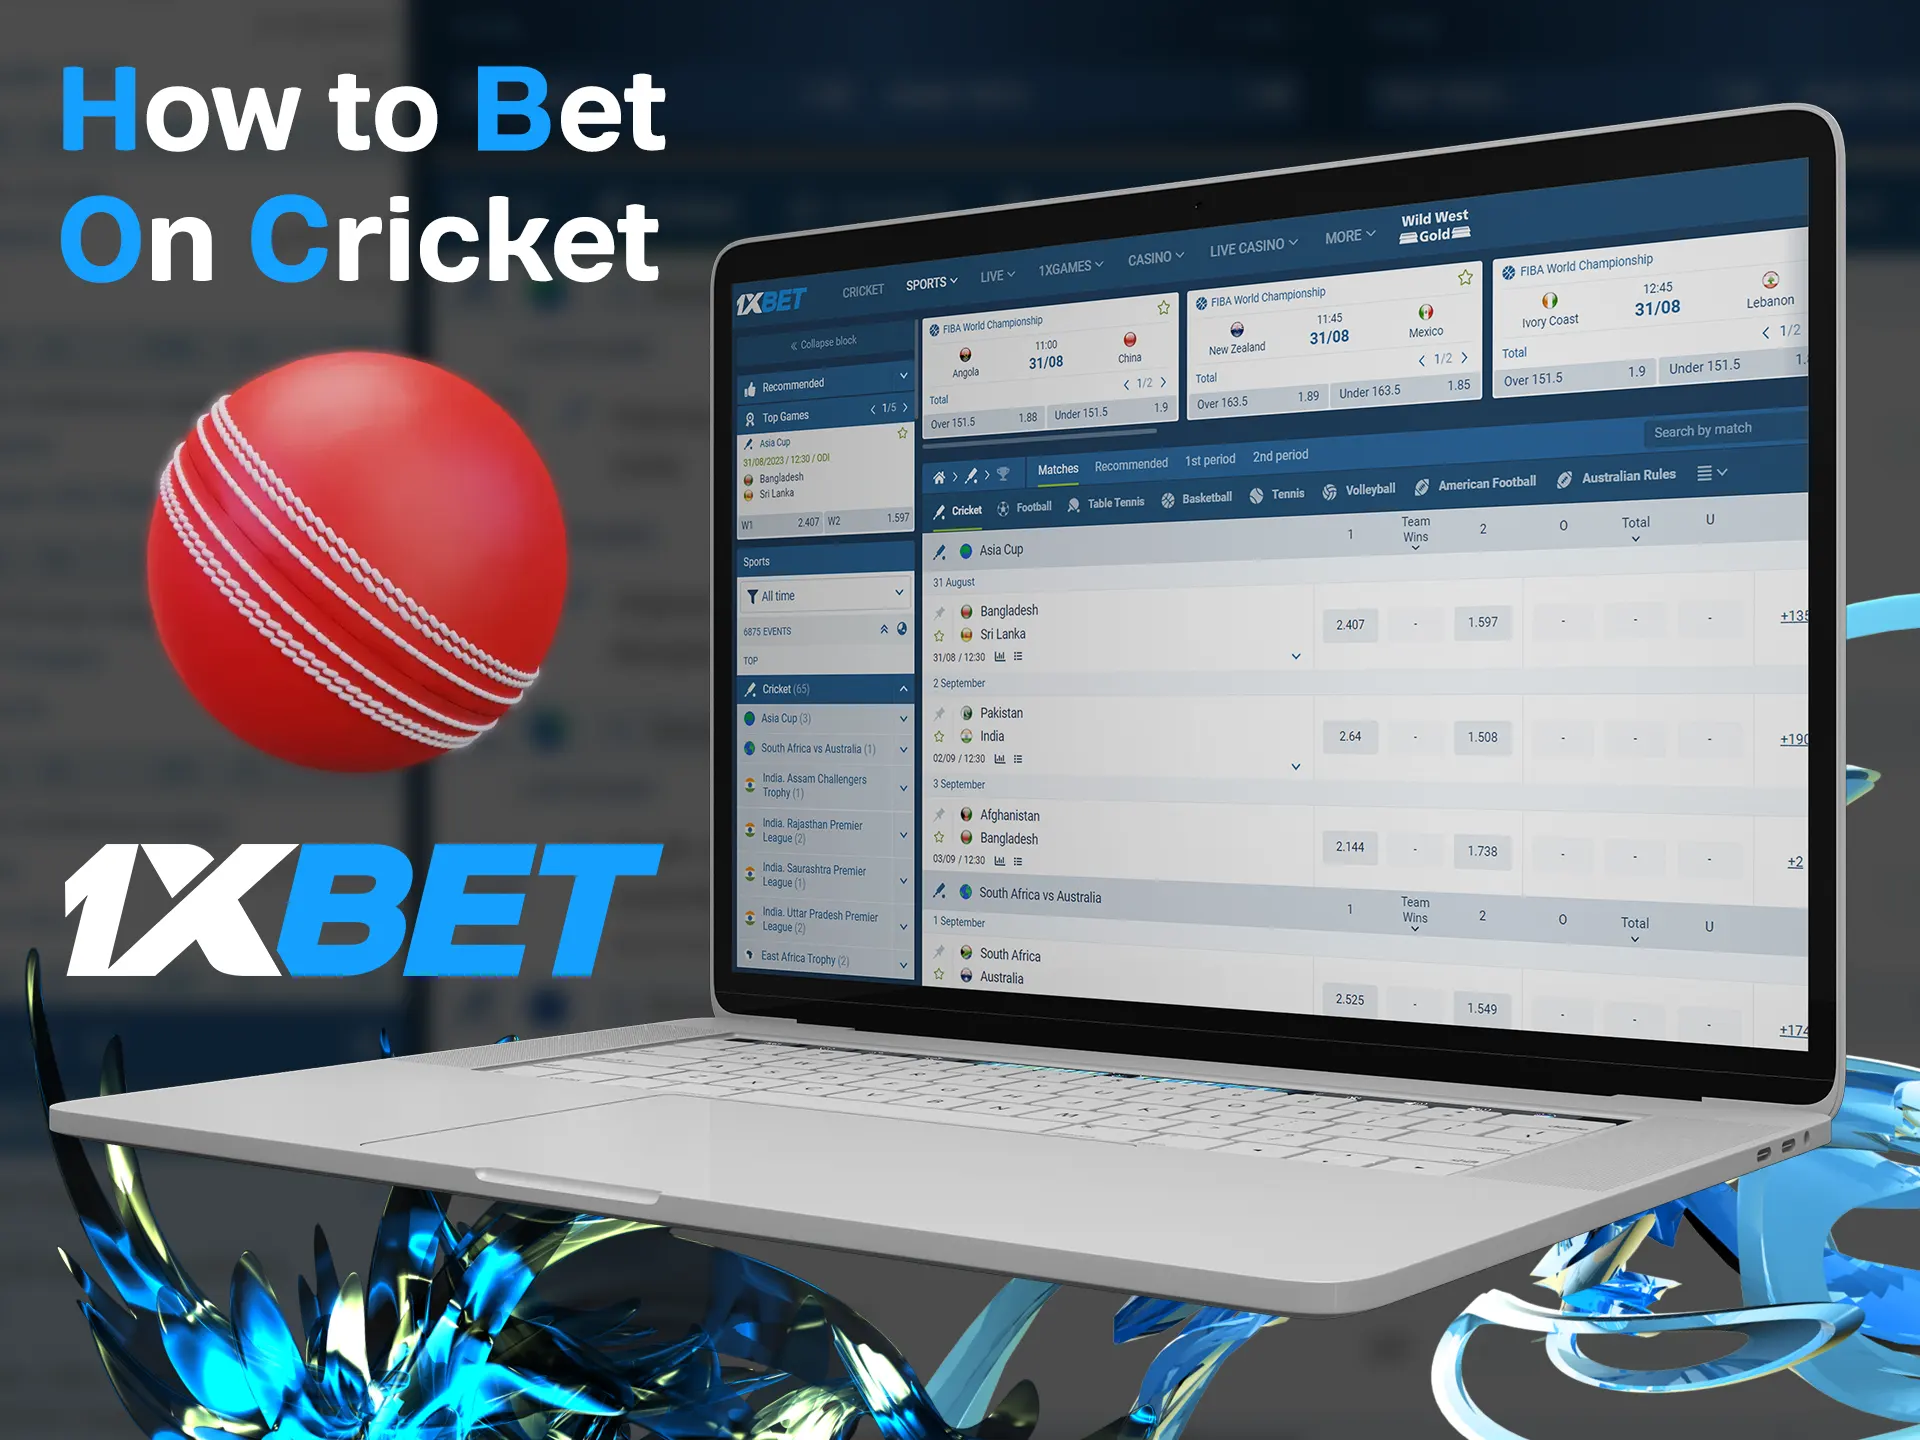 Bet on the cricket matches on the special 1xbet page.